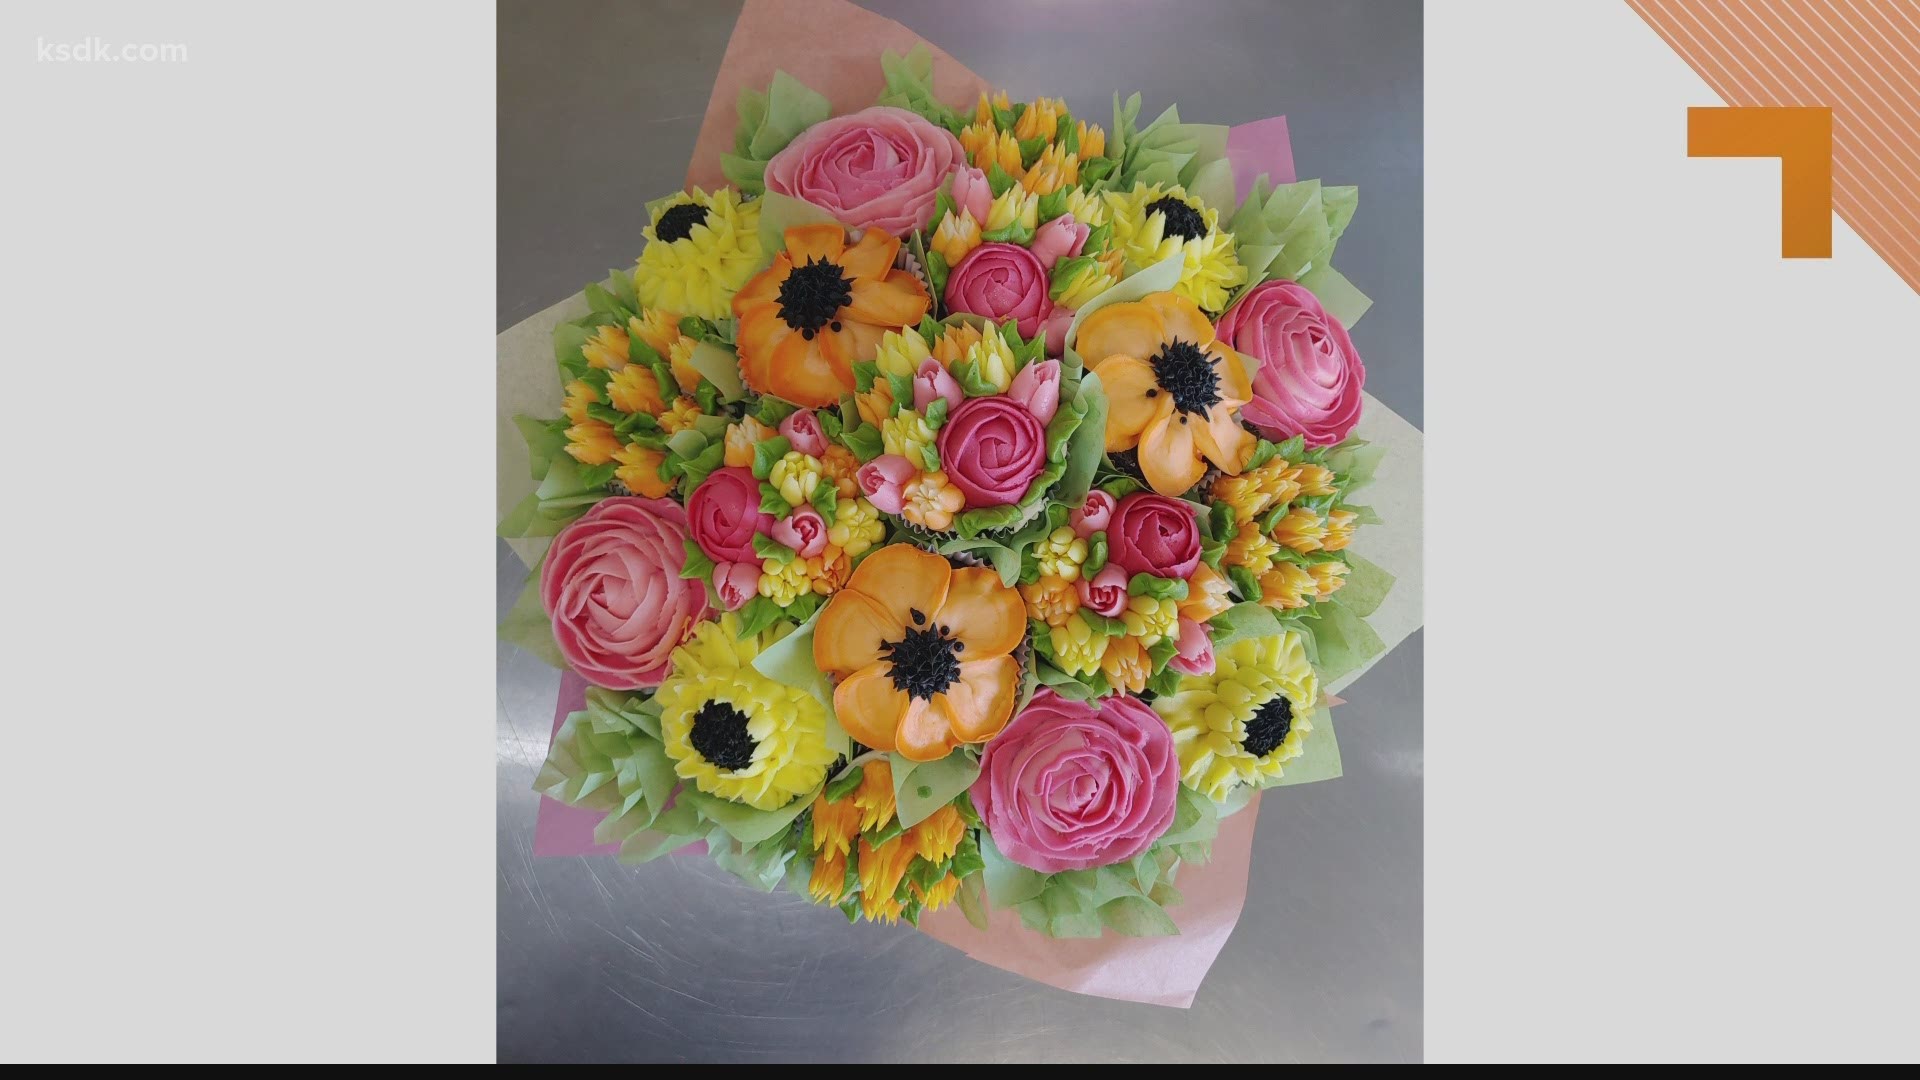 The business has several flavors and bouquet sizes to choose from, and customers can customize the cupcake bouquet to their liking.